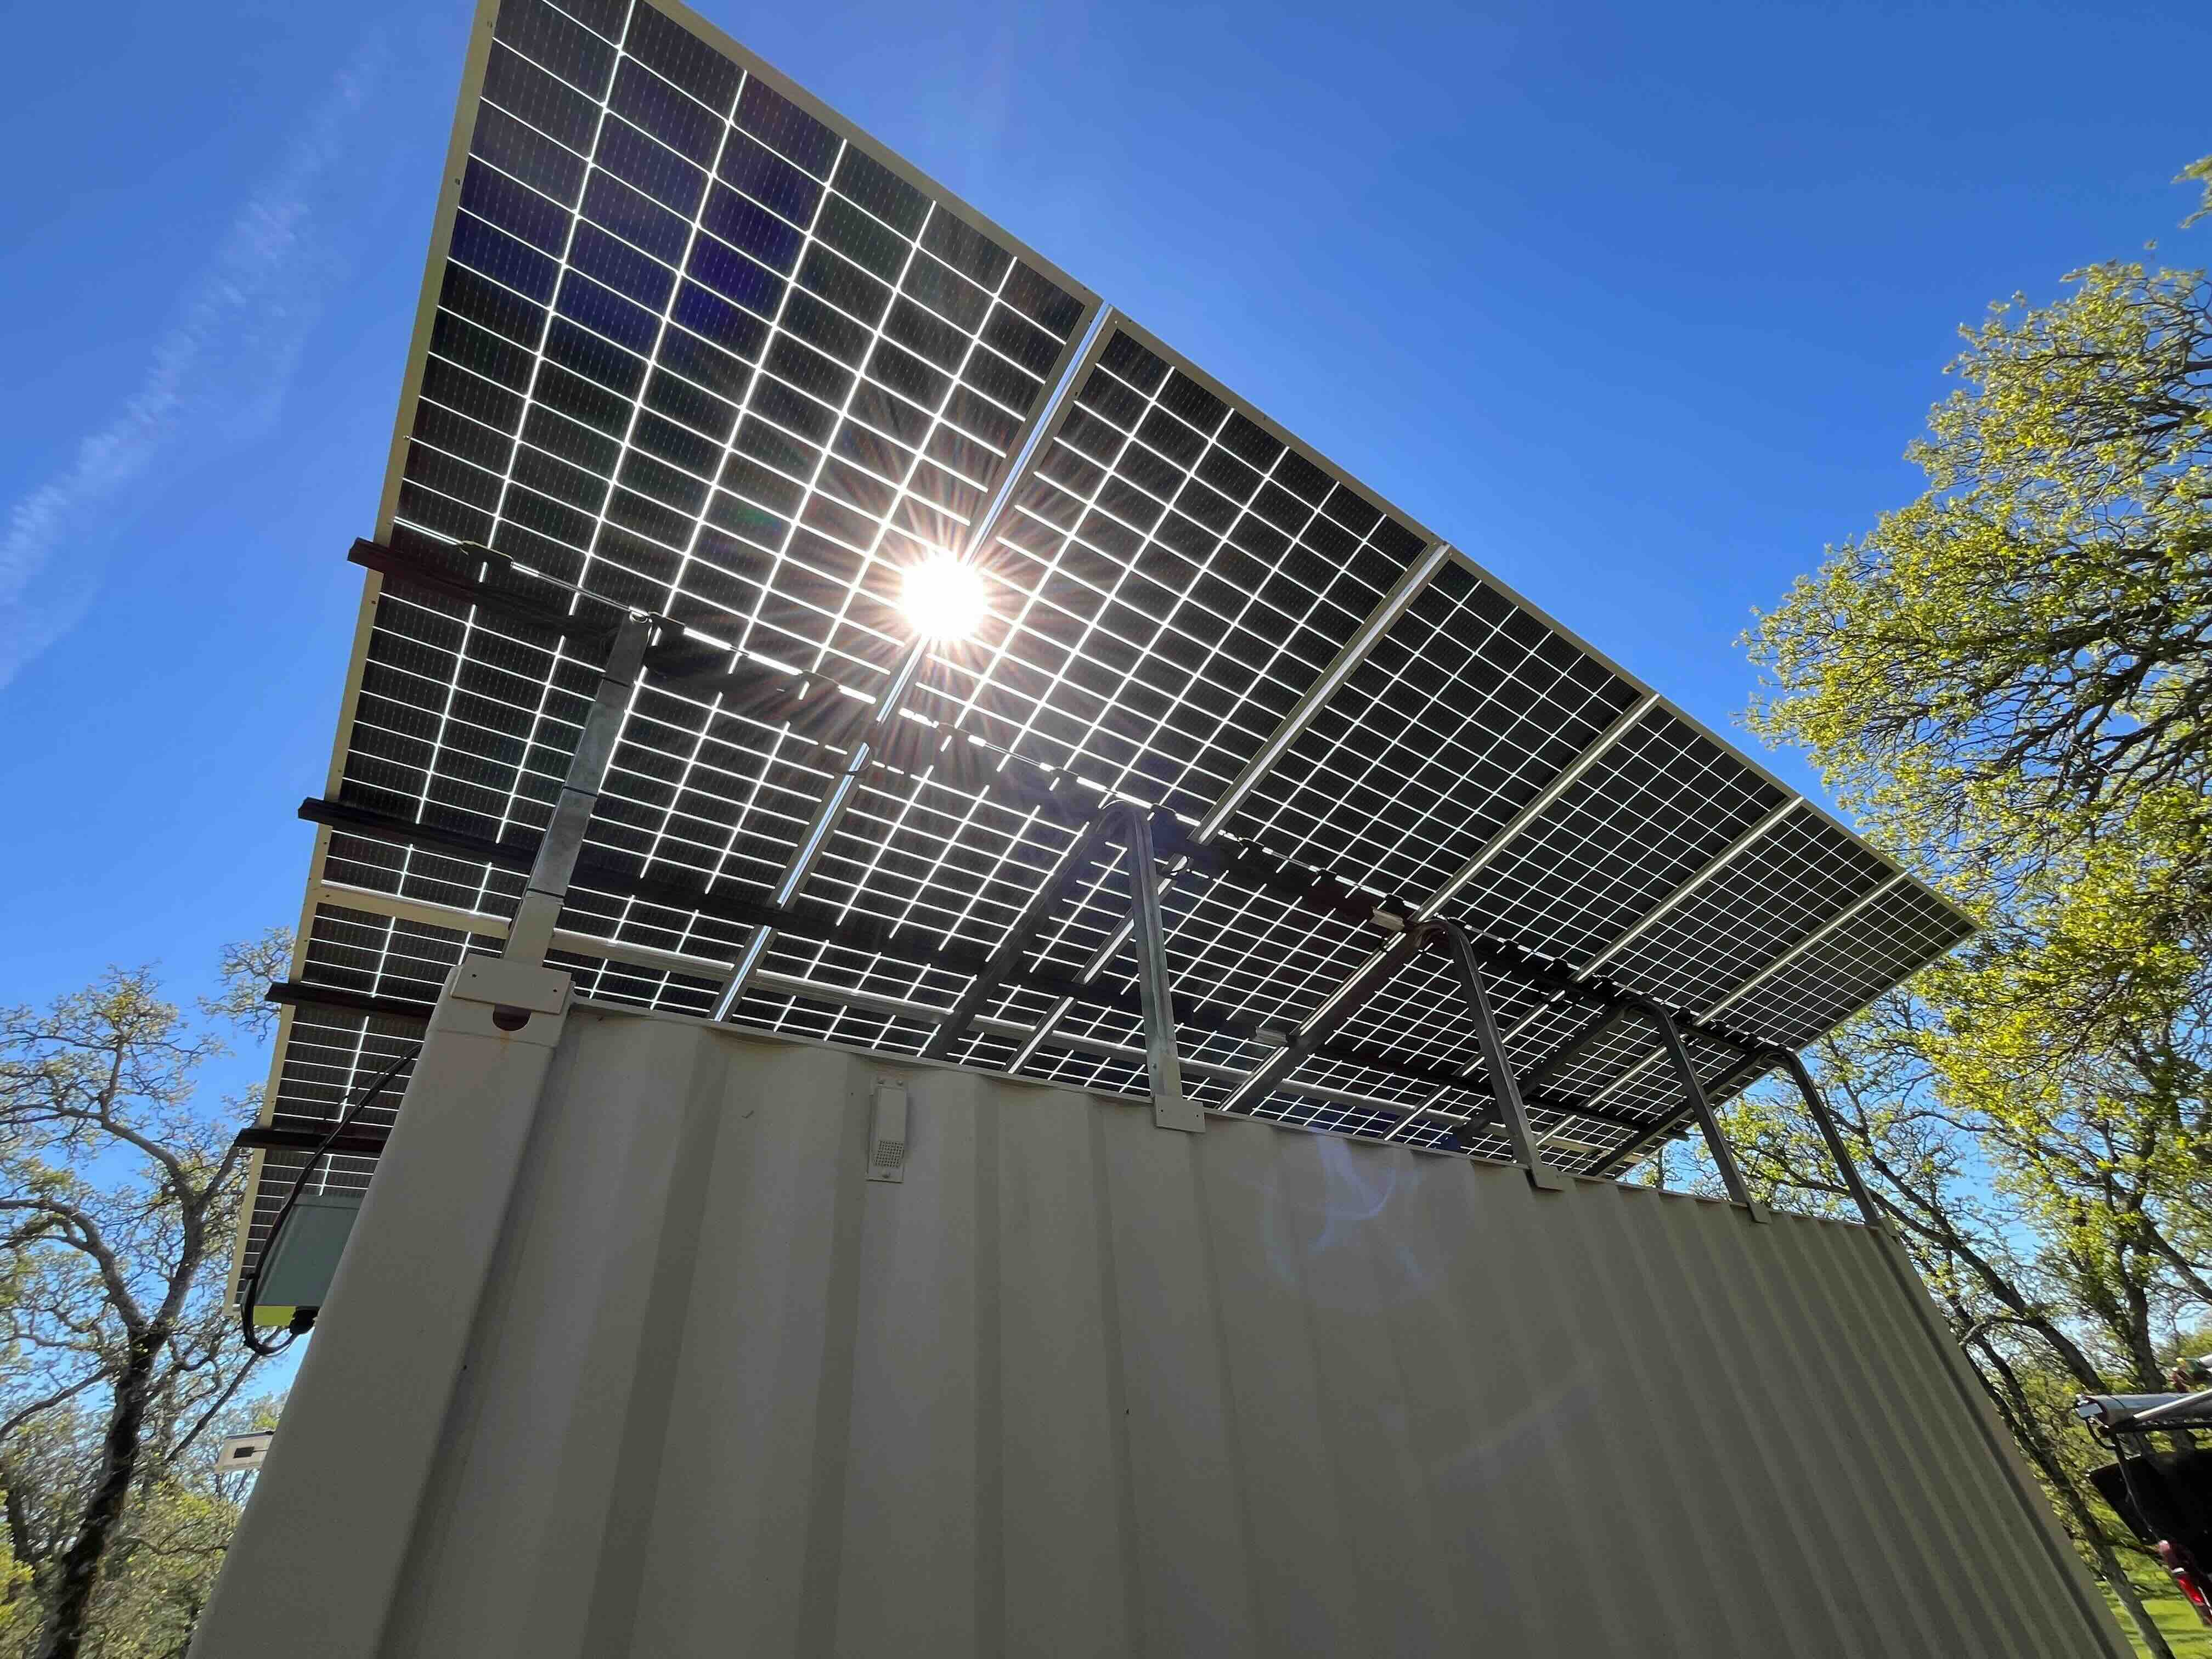 shipping container solar with bi-facial panels